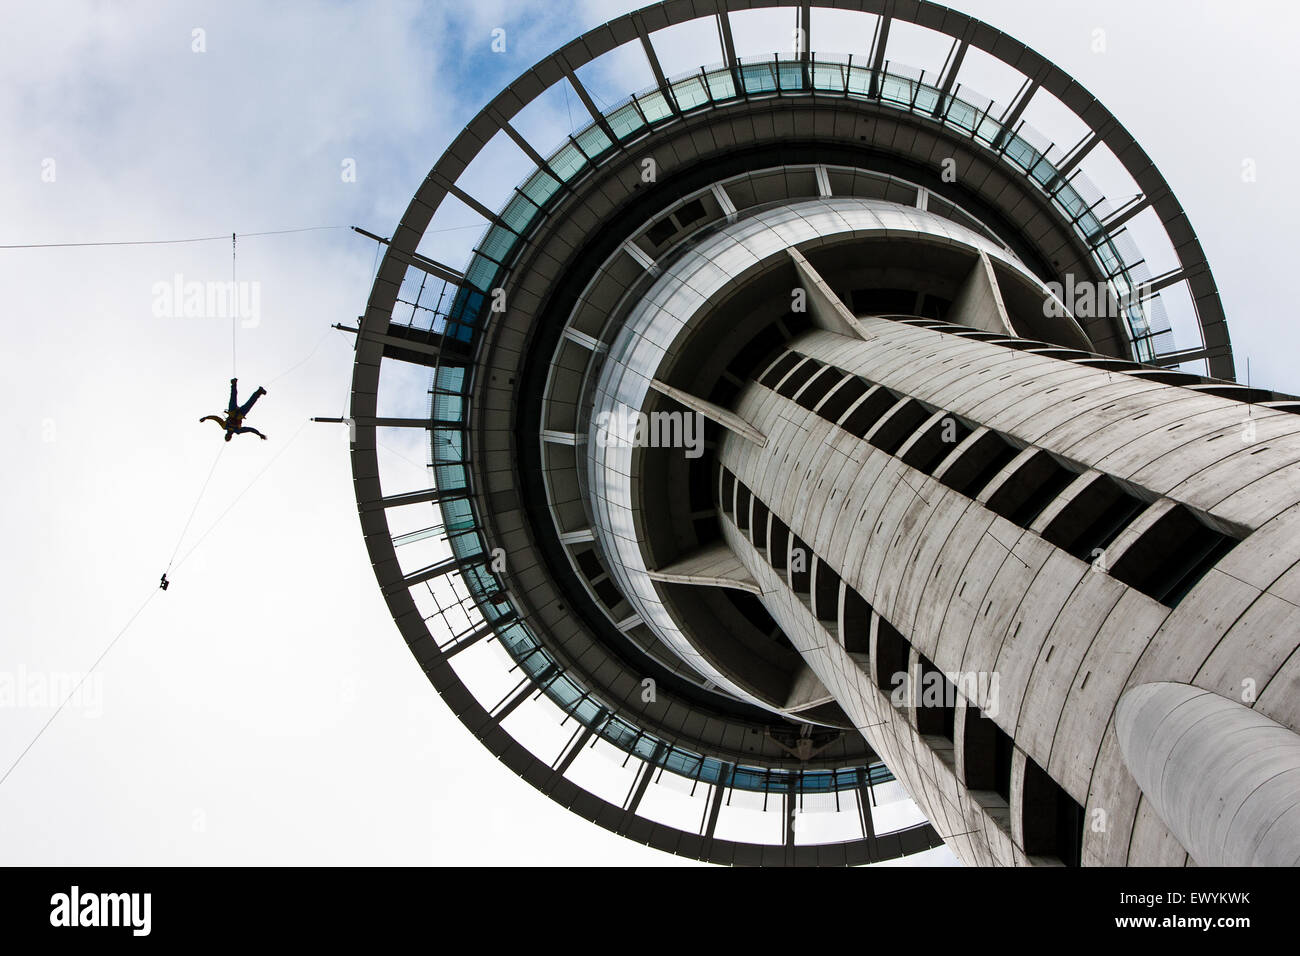 Someone sky diving jumping falling from top of Sky Tower. Auckland,New Zealand Stock Photo